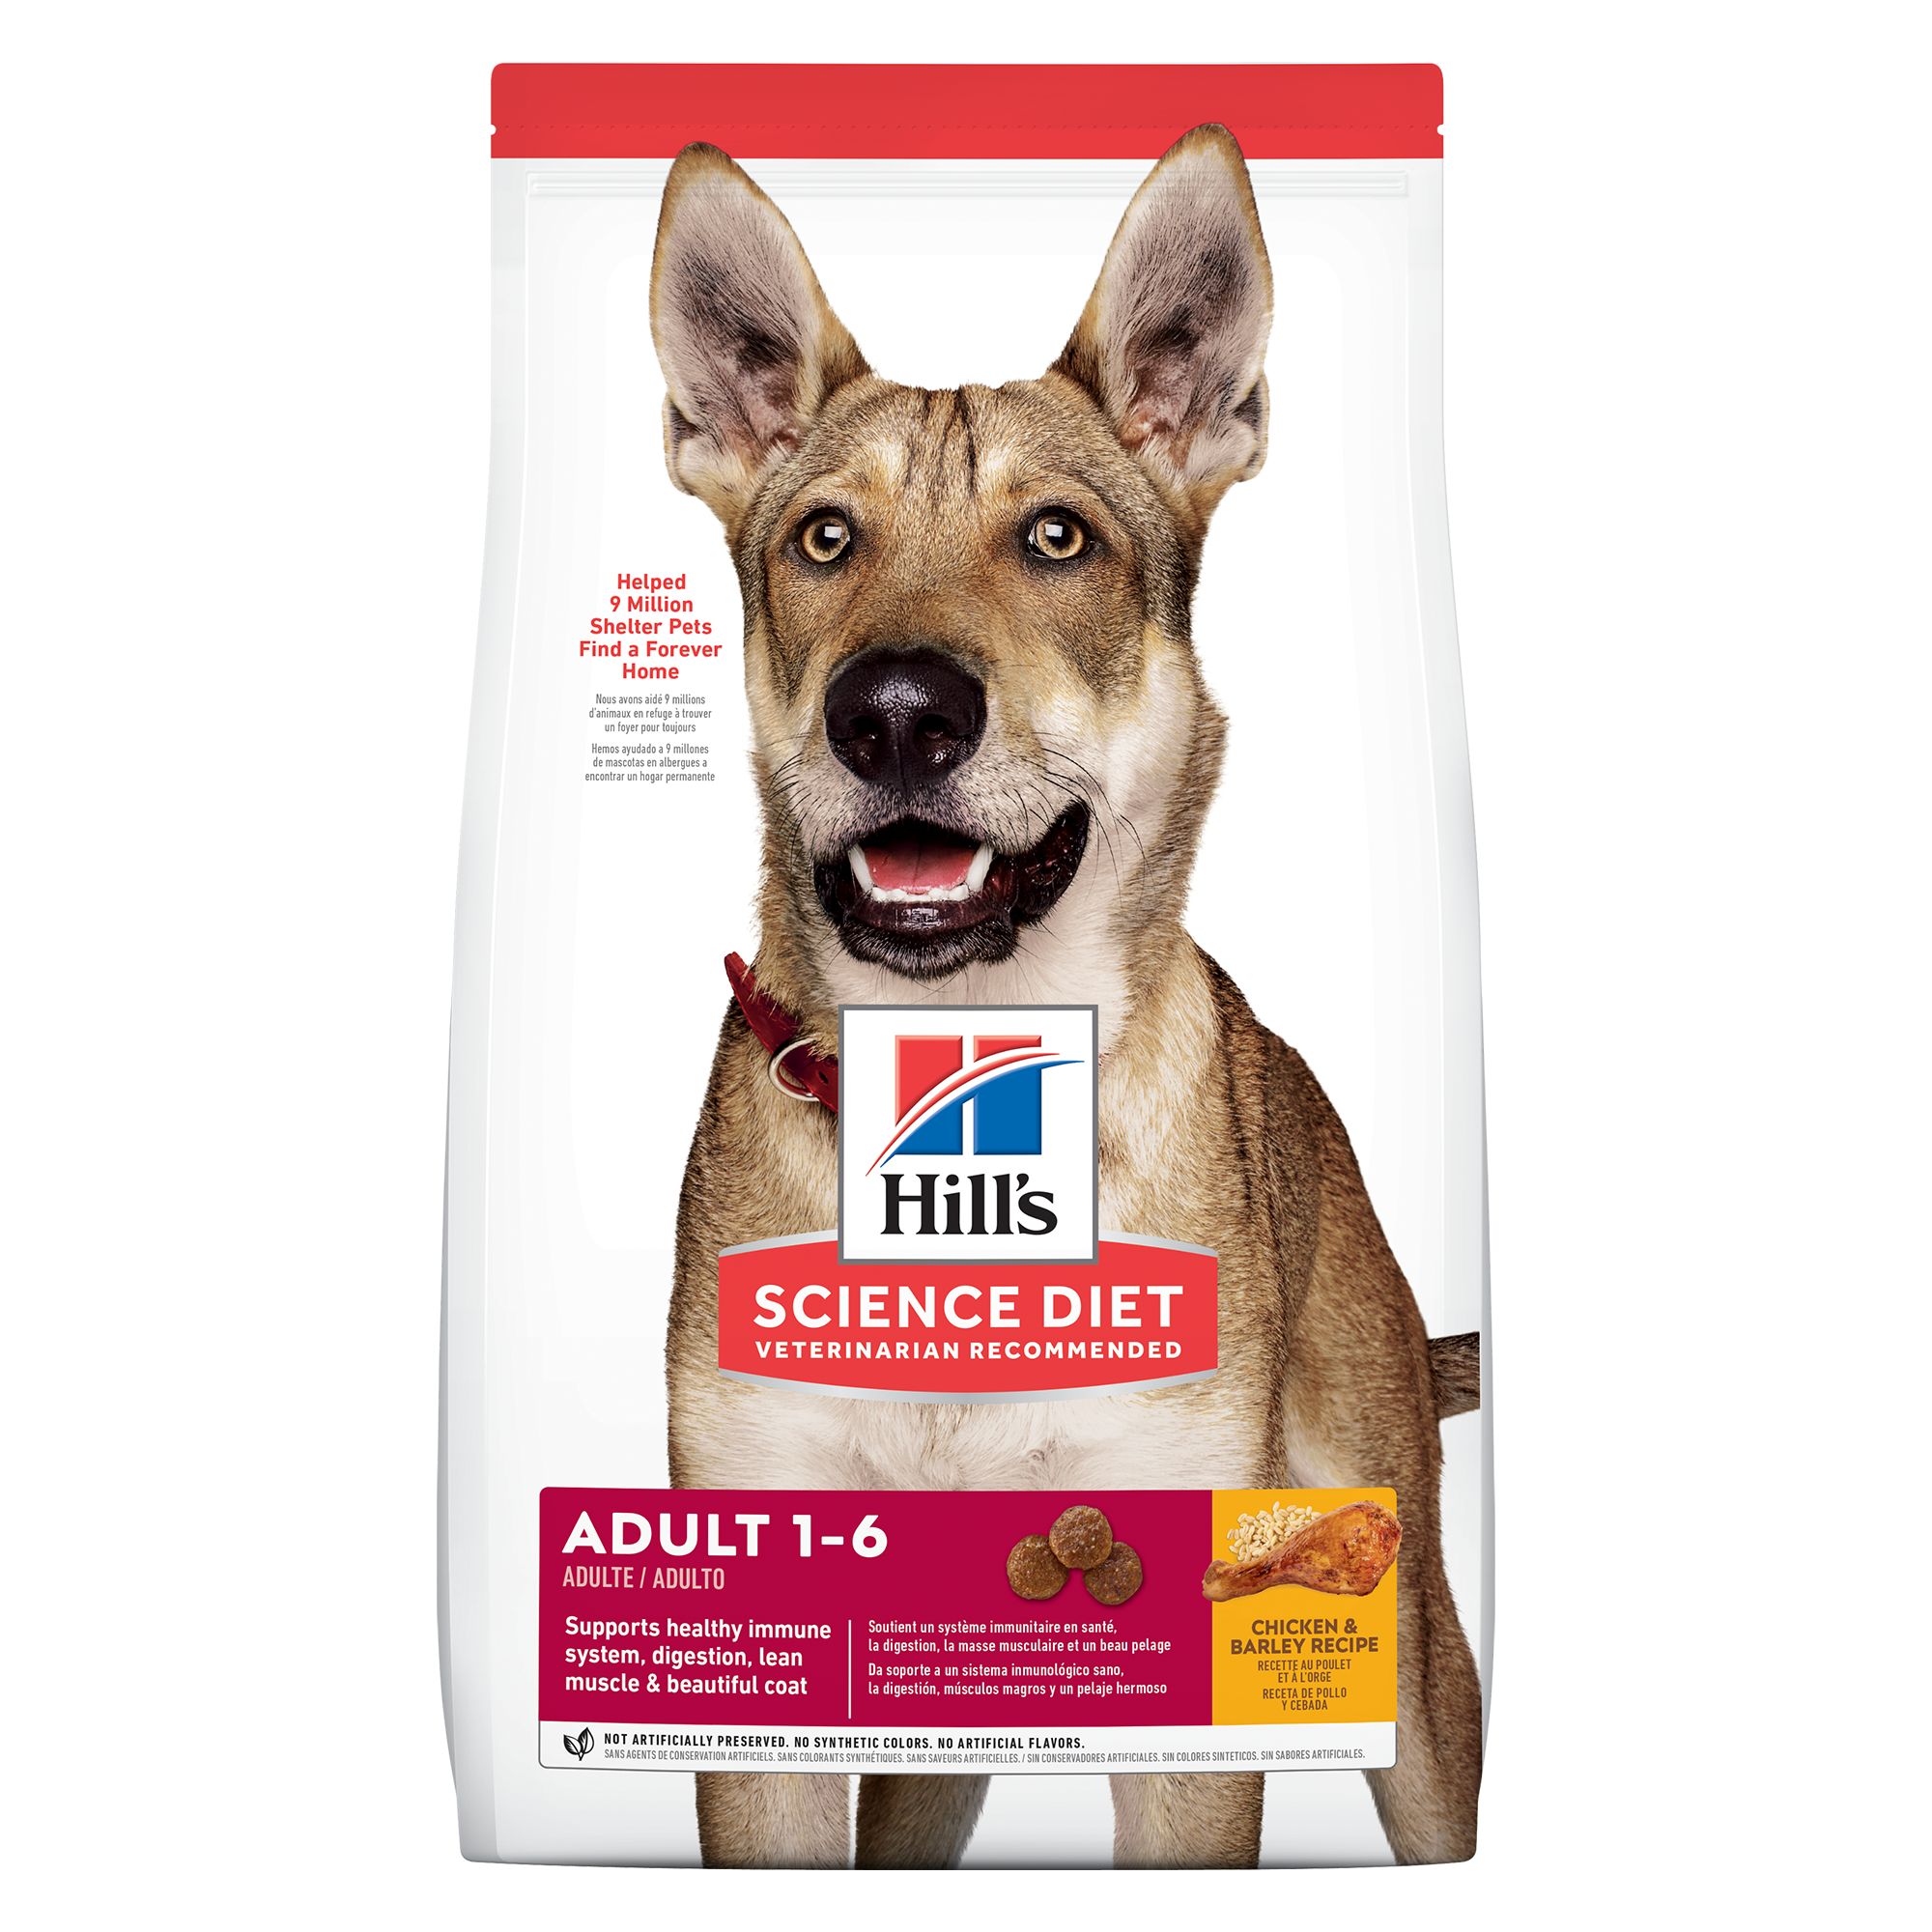 cheapest place to buy hill's science diet dog food